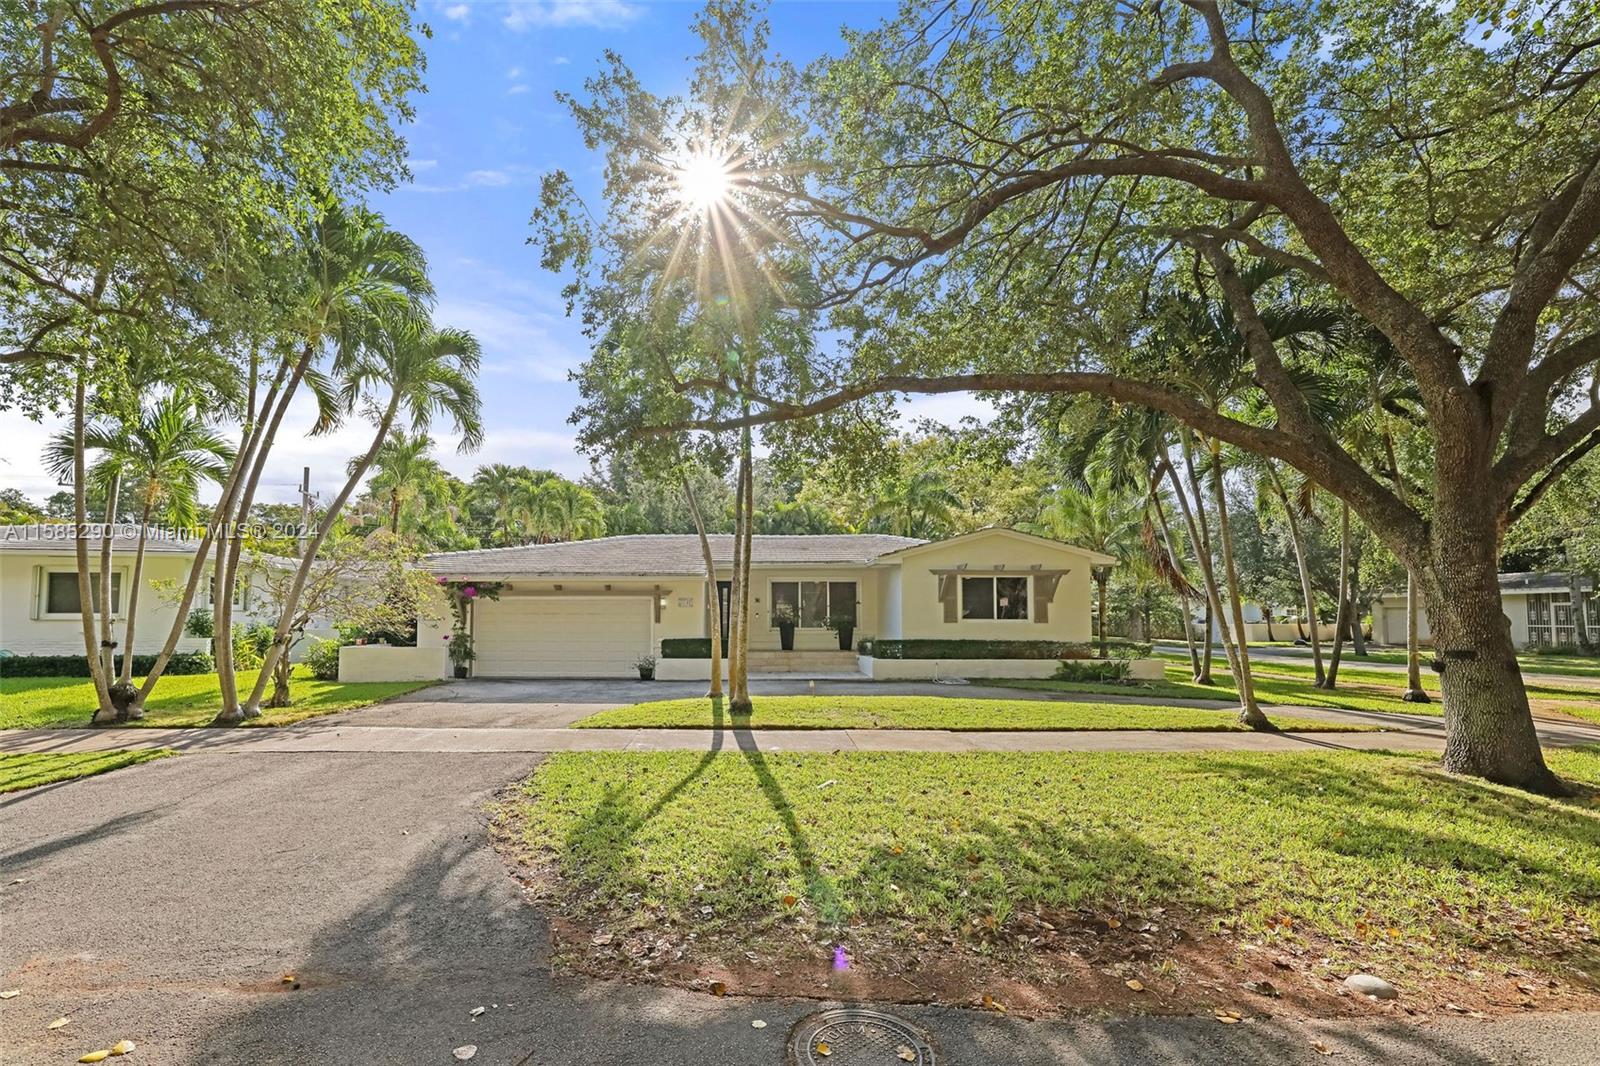 THIS CORAL GABLES RIVIERA GEM HAS IT ALL - SPACIOUS 3 BD 3.5 BATH WITH POOL AND 2 CAR GARAGE ON 8,183 SF CORNER LOT. THIS HOME HAS BEEN LOVINGLY MAINTAINED AND FEATURES IMPACT GLASS, NEWER APPLIANCES, WOOD FLOORS THROUGHOUT, BEAUTIFUL OUTDOOR PATIO AND POOL AREA, AND 2 OF 3 BEDROOMS WITH EN SUITE BATHROOM THAT COULD BE USED AS PRIMARY BDRM. AMAZING SOUTH GABLES LOCATION CLOSE TO EXCELLENT SCHOOLS, PARKS UM, AND MORE. CALL OR TEXT LA NOW FOR EASY SHOWING